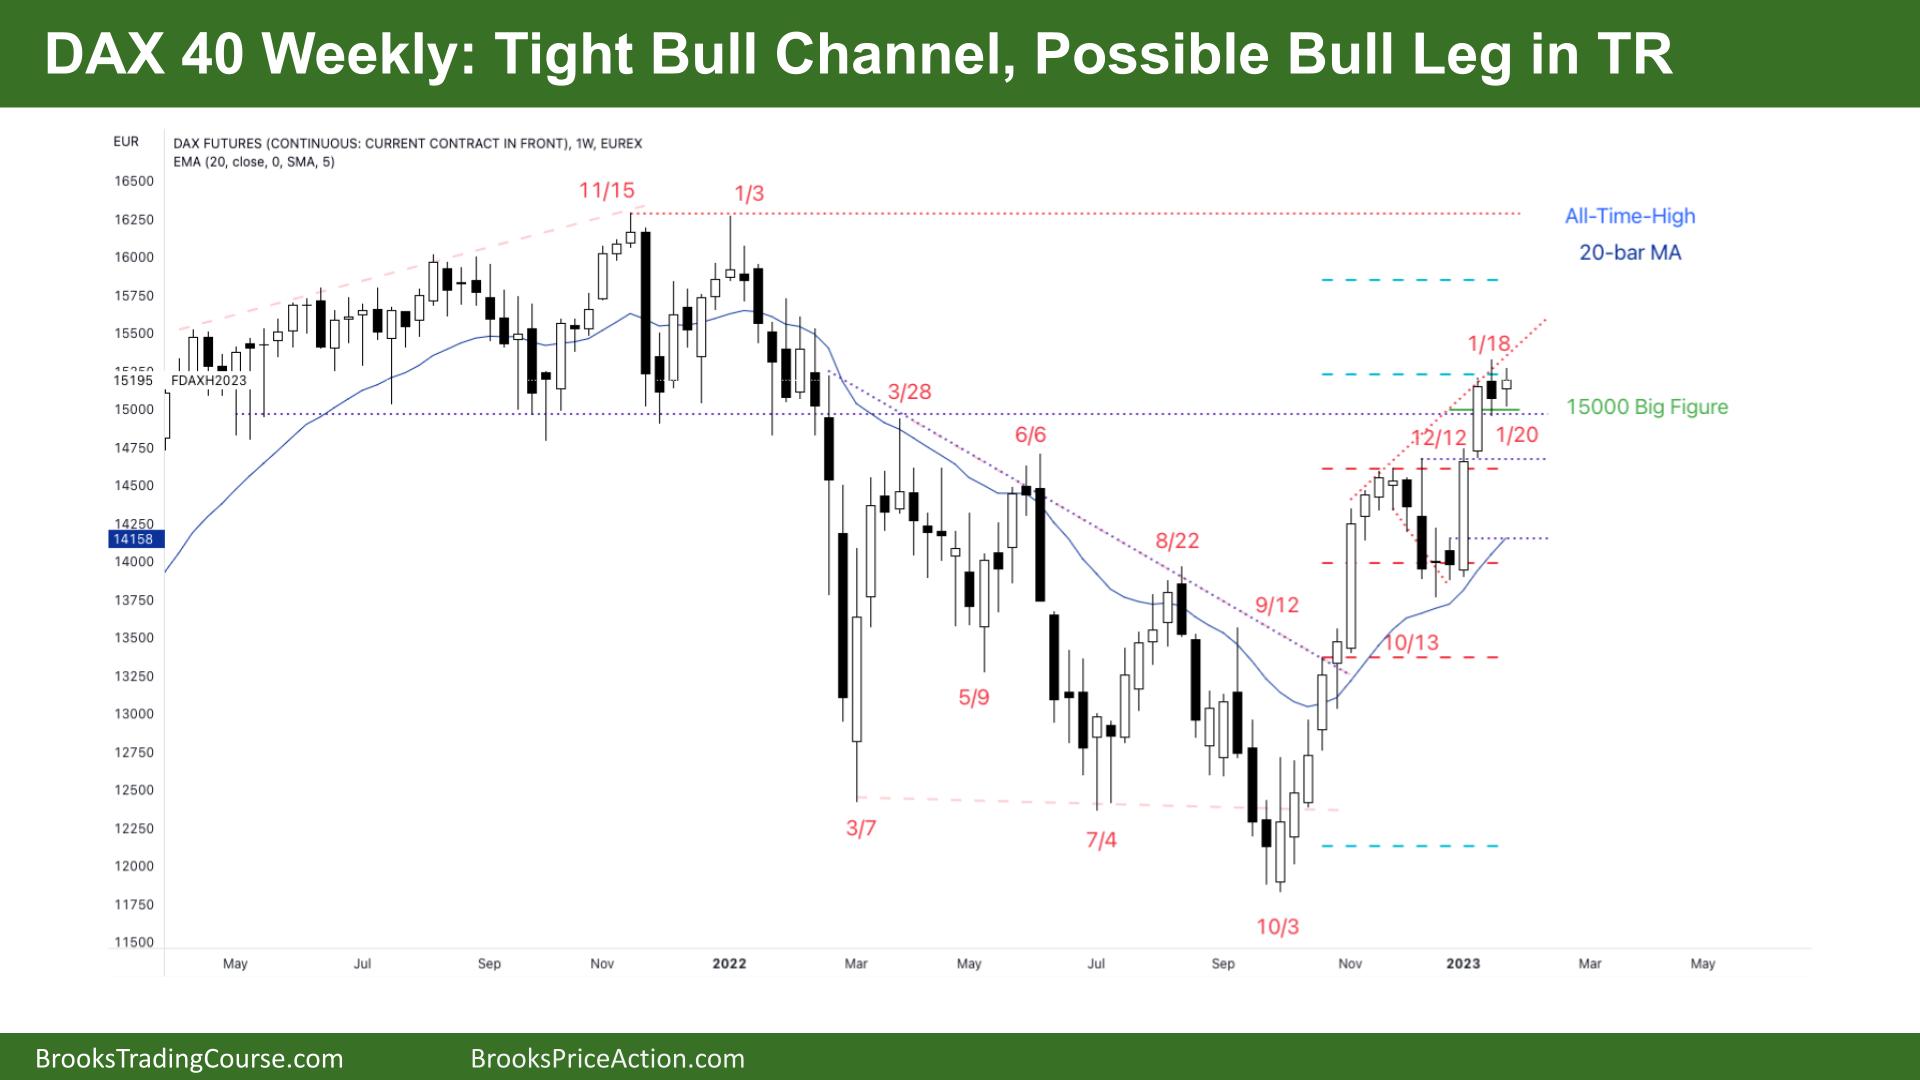 DAX 40 Possible Bull Leg in TR and Tight Bull Channel